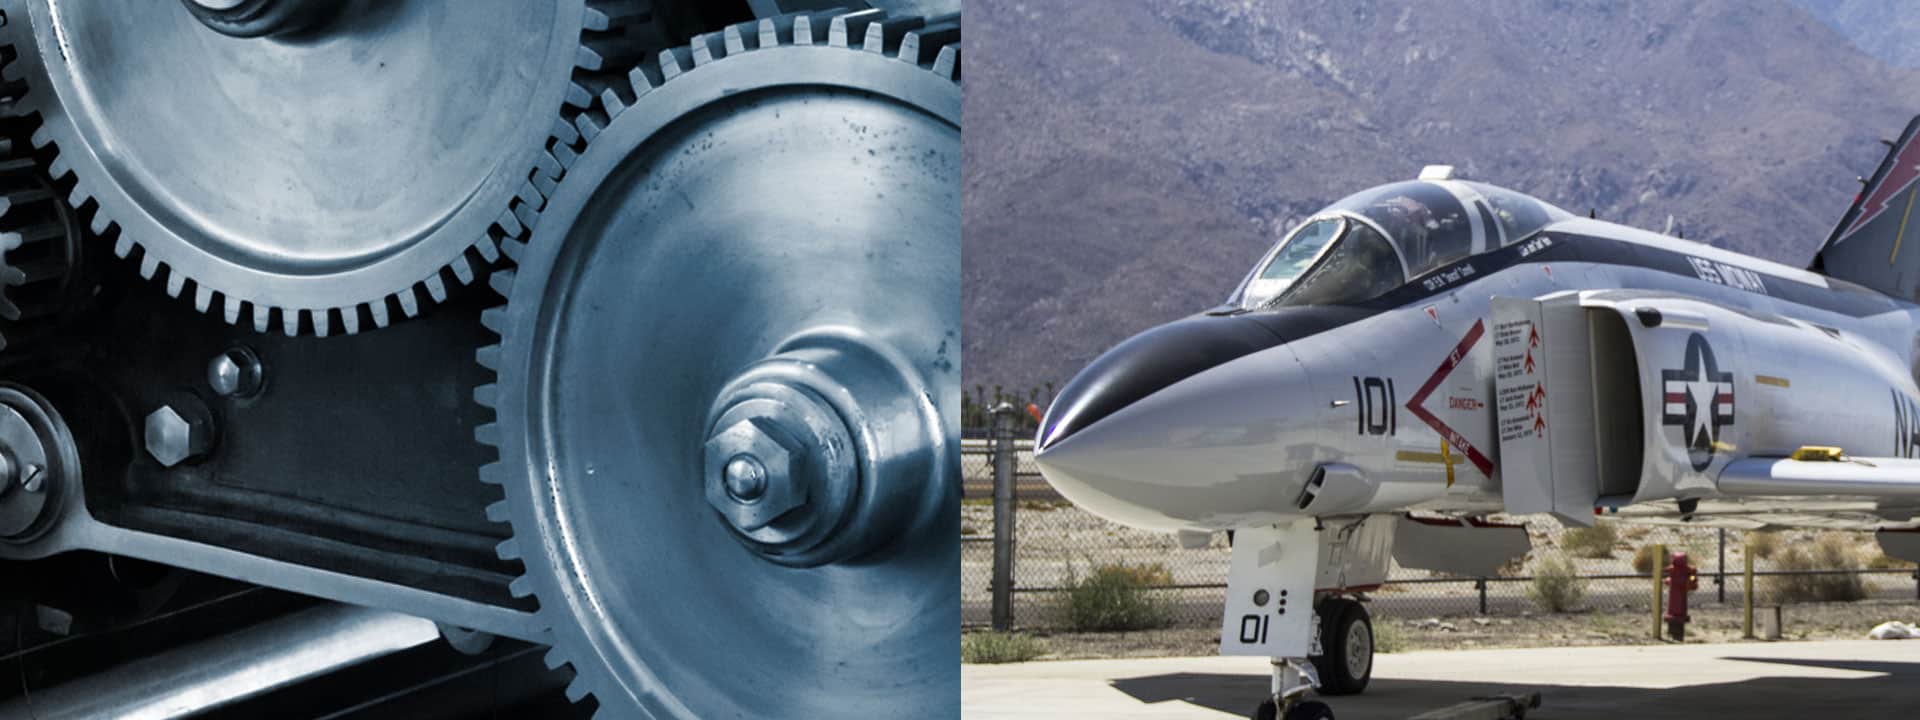 Close up split photo with metal machine piece and military plane